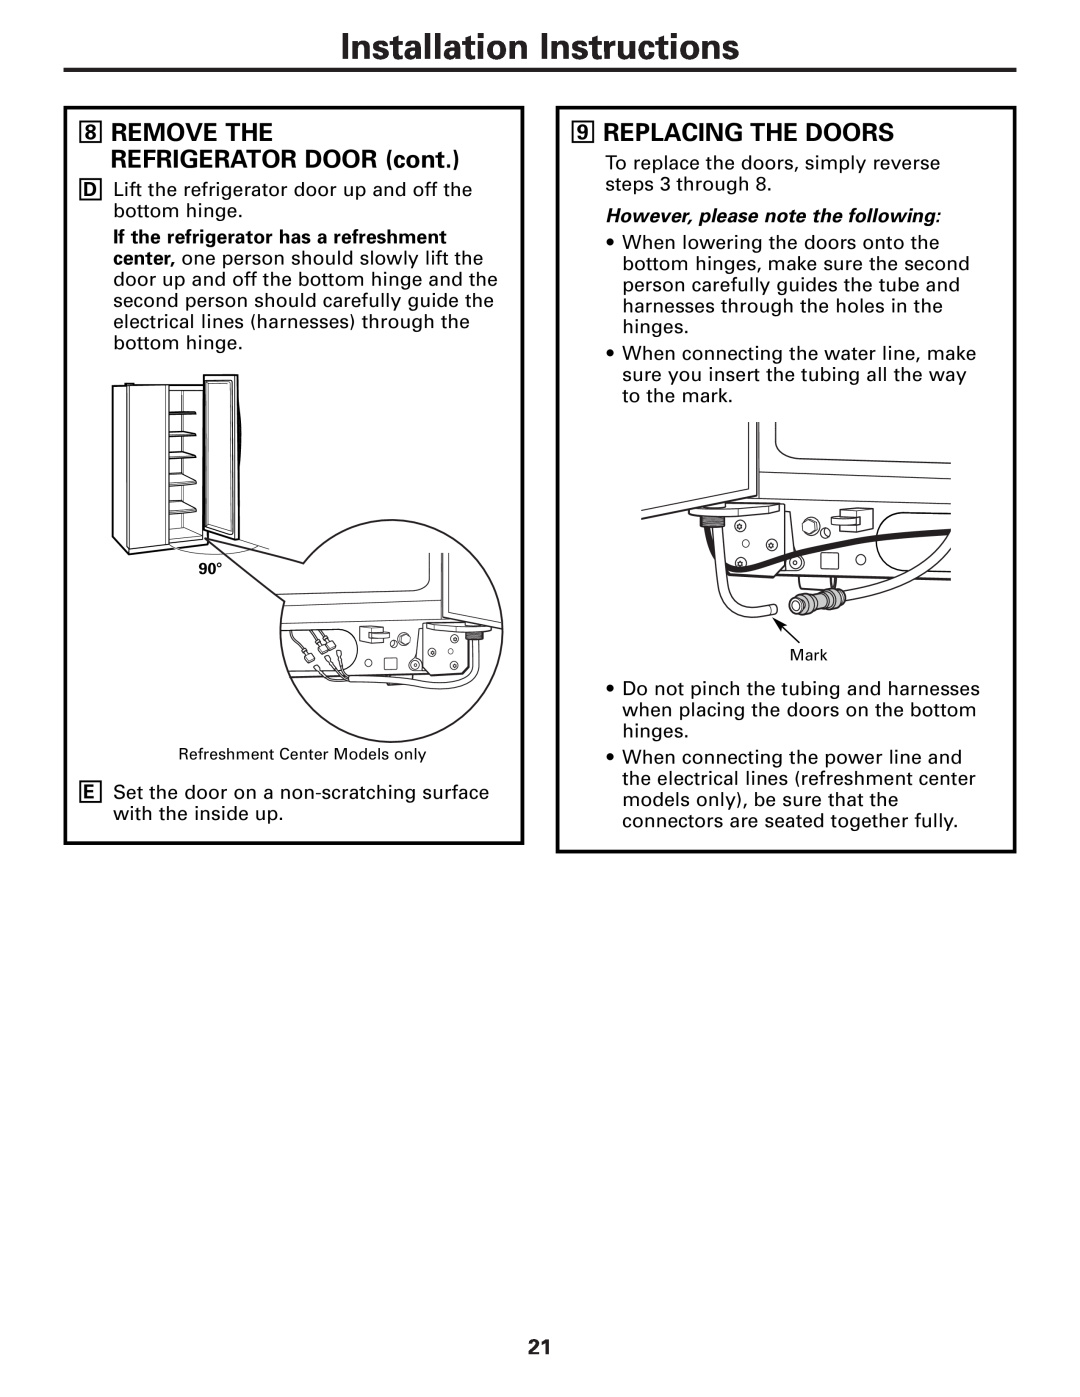 GE MODELS 23 AND 25 Replacing The Doors, However, please note the following, Installation Instructions 